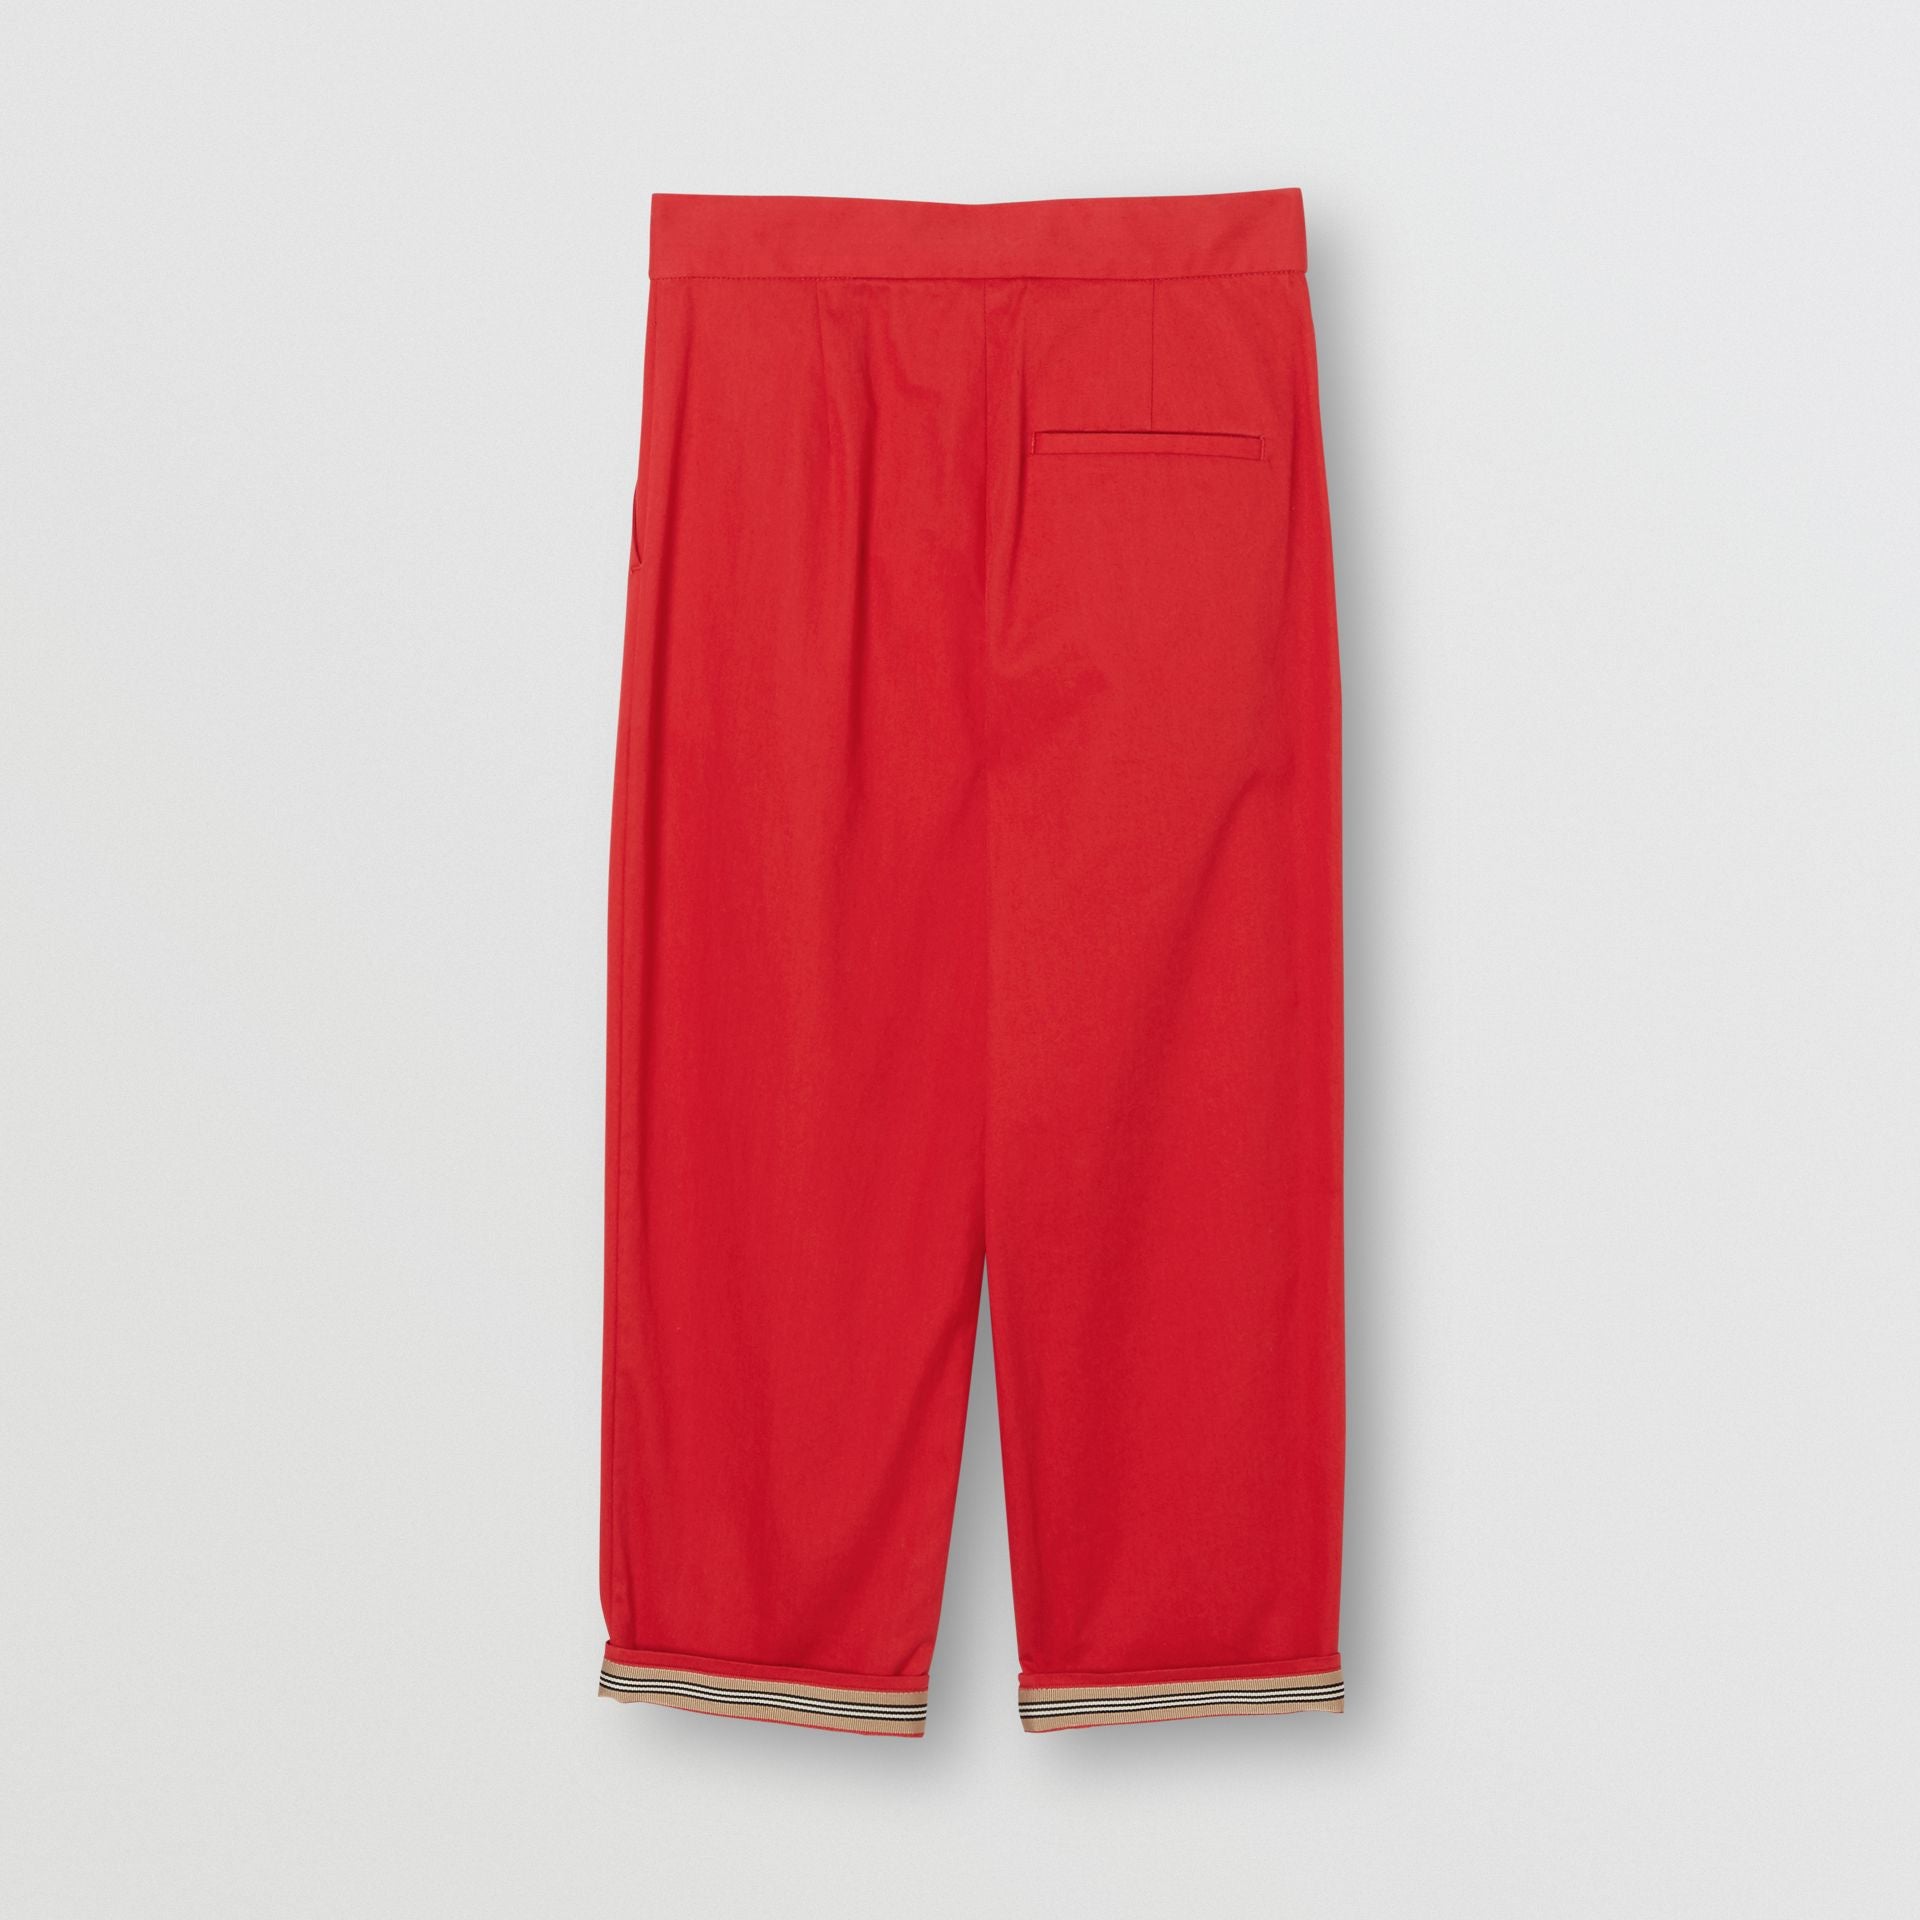 Girls Bright Red Cotton Trousers